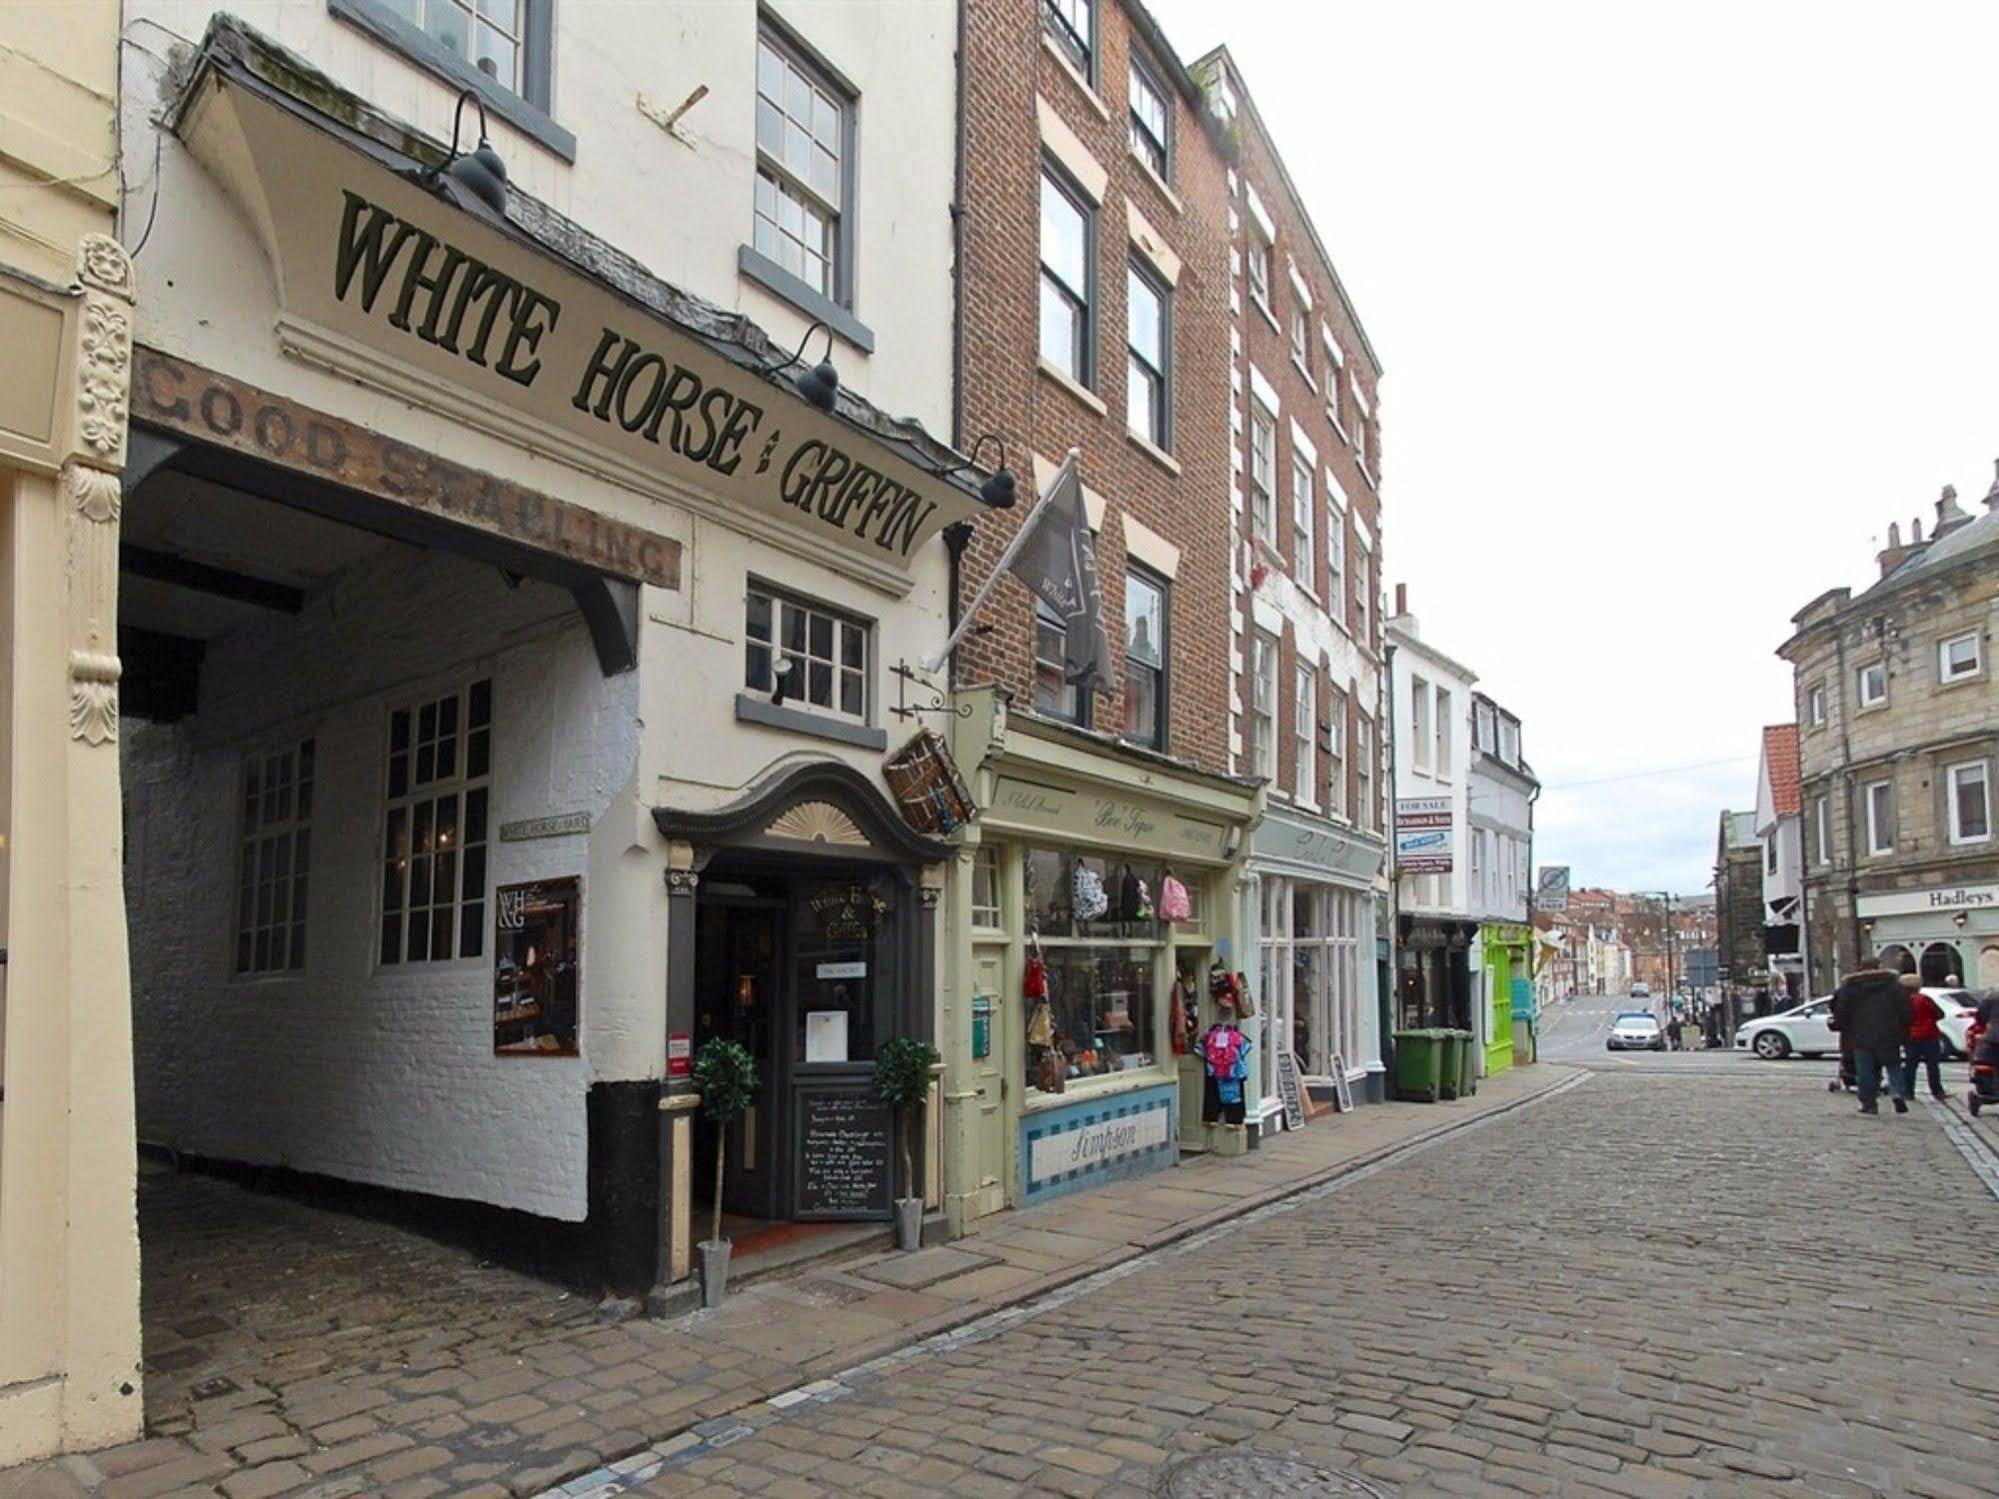 White Horse & Griffin Hotel Whitby Buitenkant foto